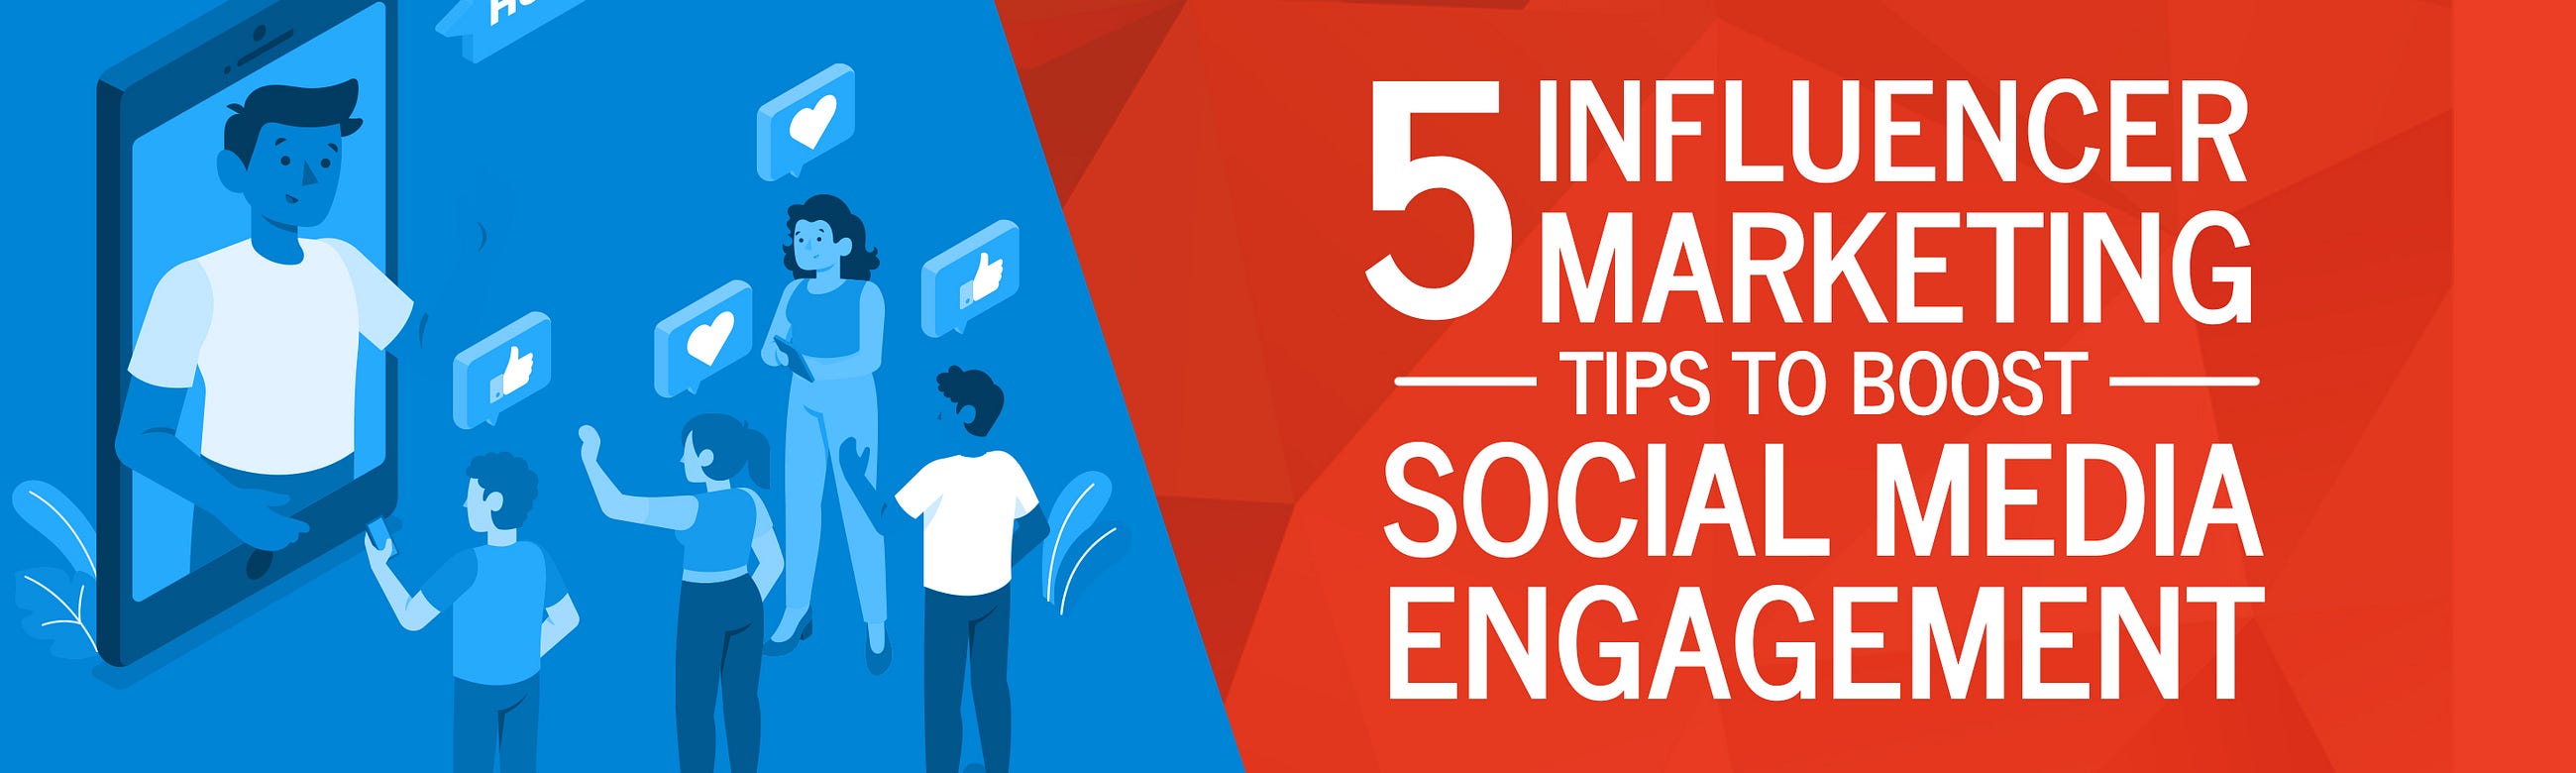 5 Influencer Marketing Tips to Boost Social Media Engagement